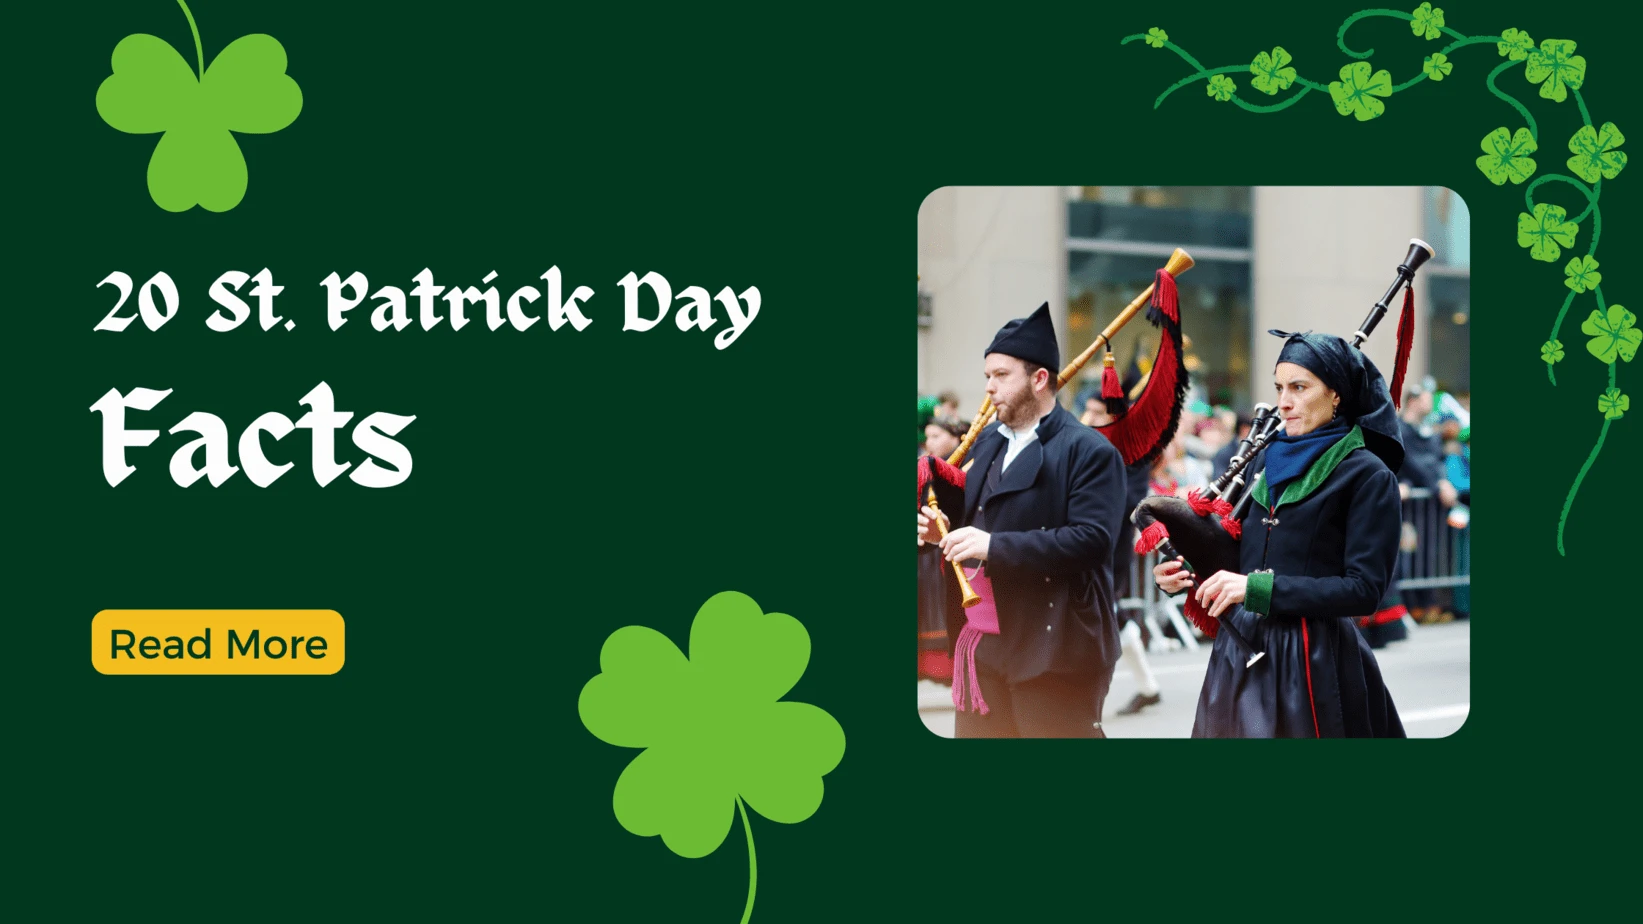 Político Suplemento Electrónico 20 Surprising And Interesting St Patrick's Day Facts ☘️